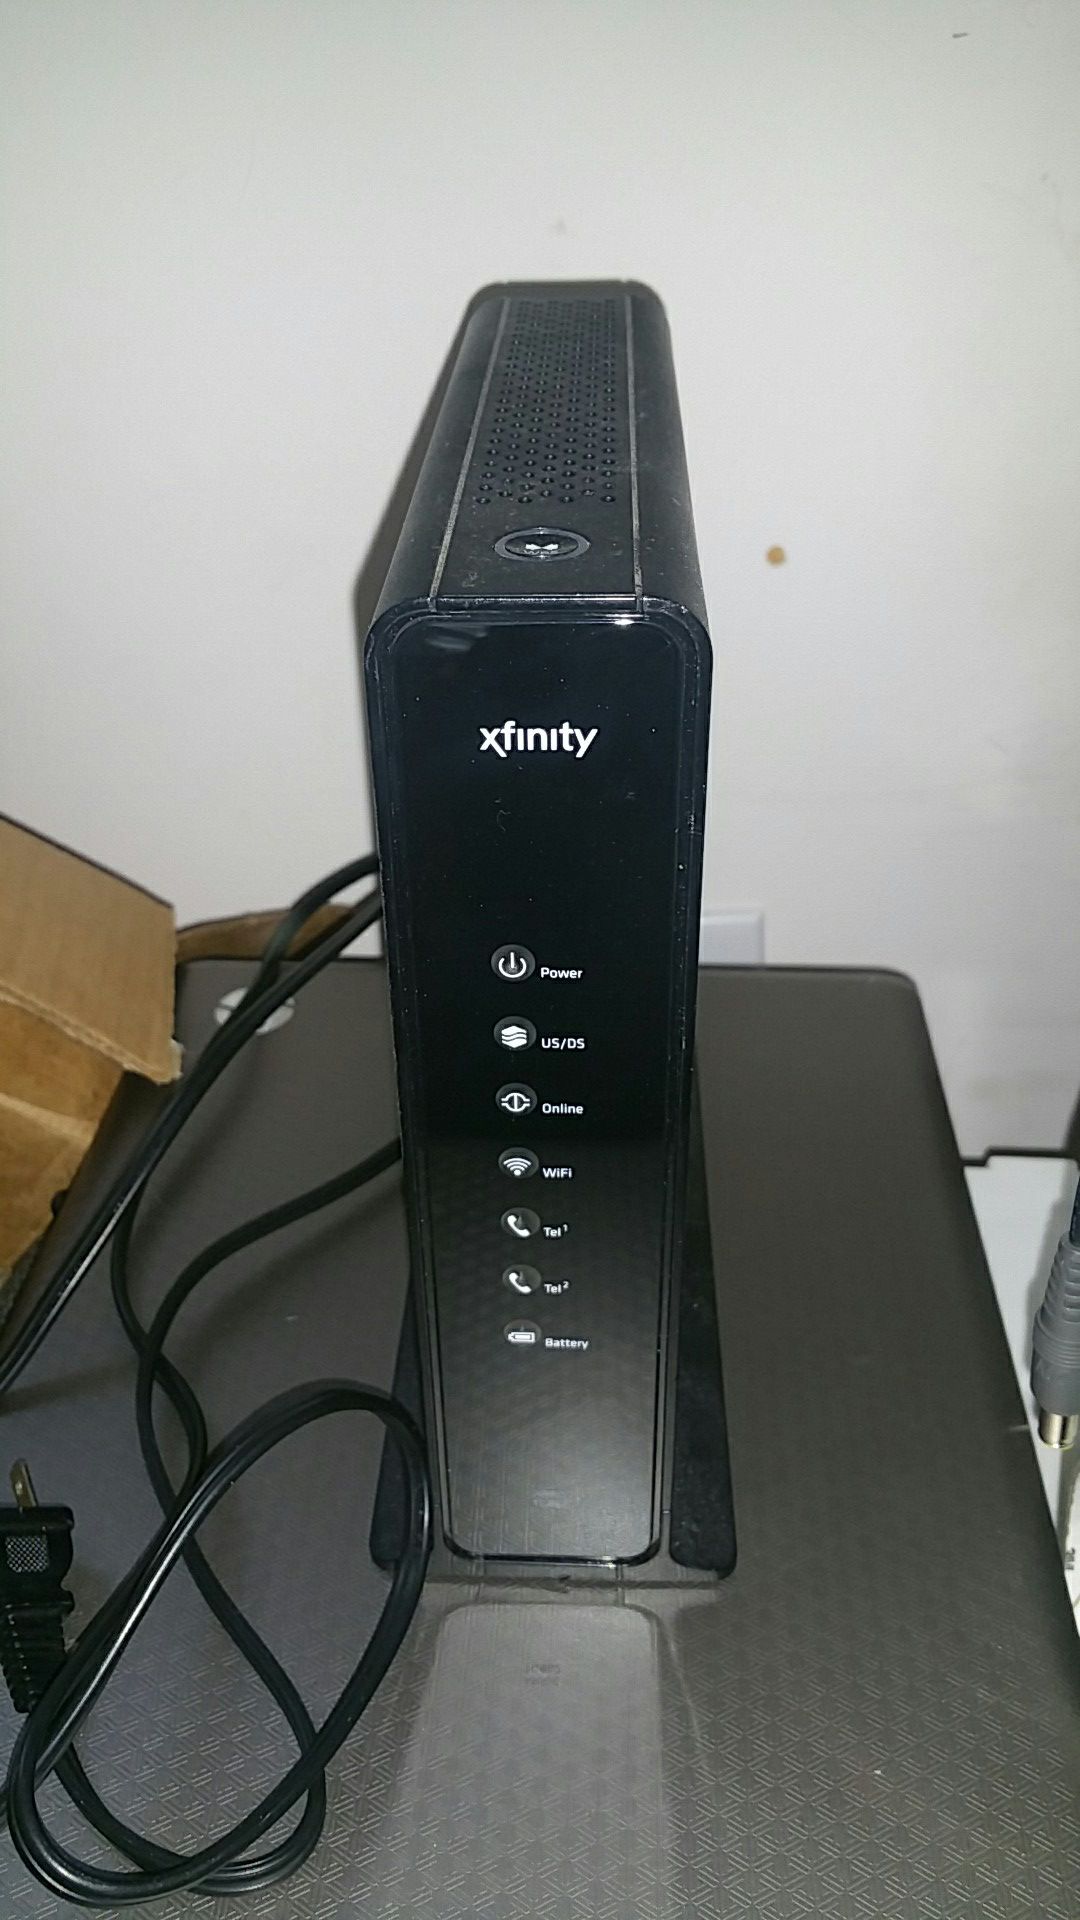 Arris TG862G/CT Xfinity Router